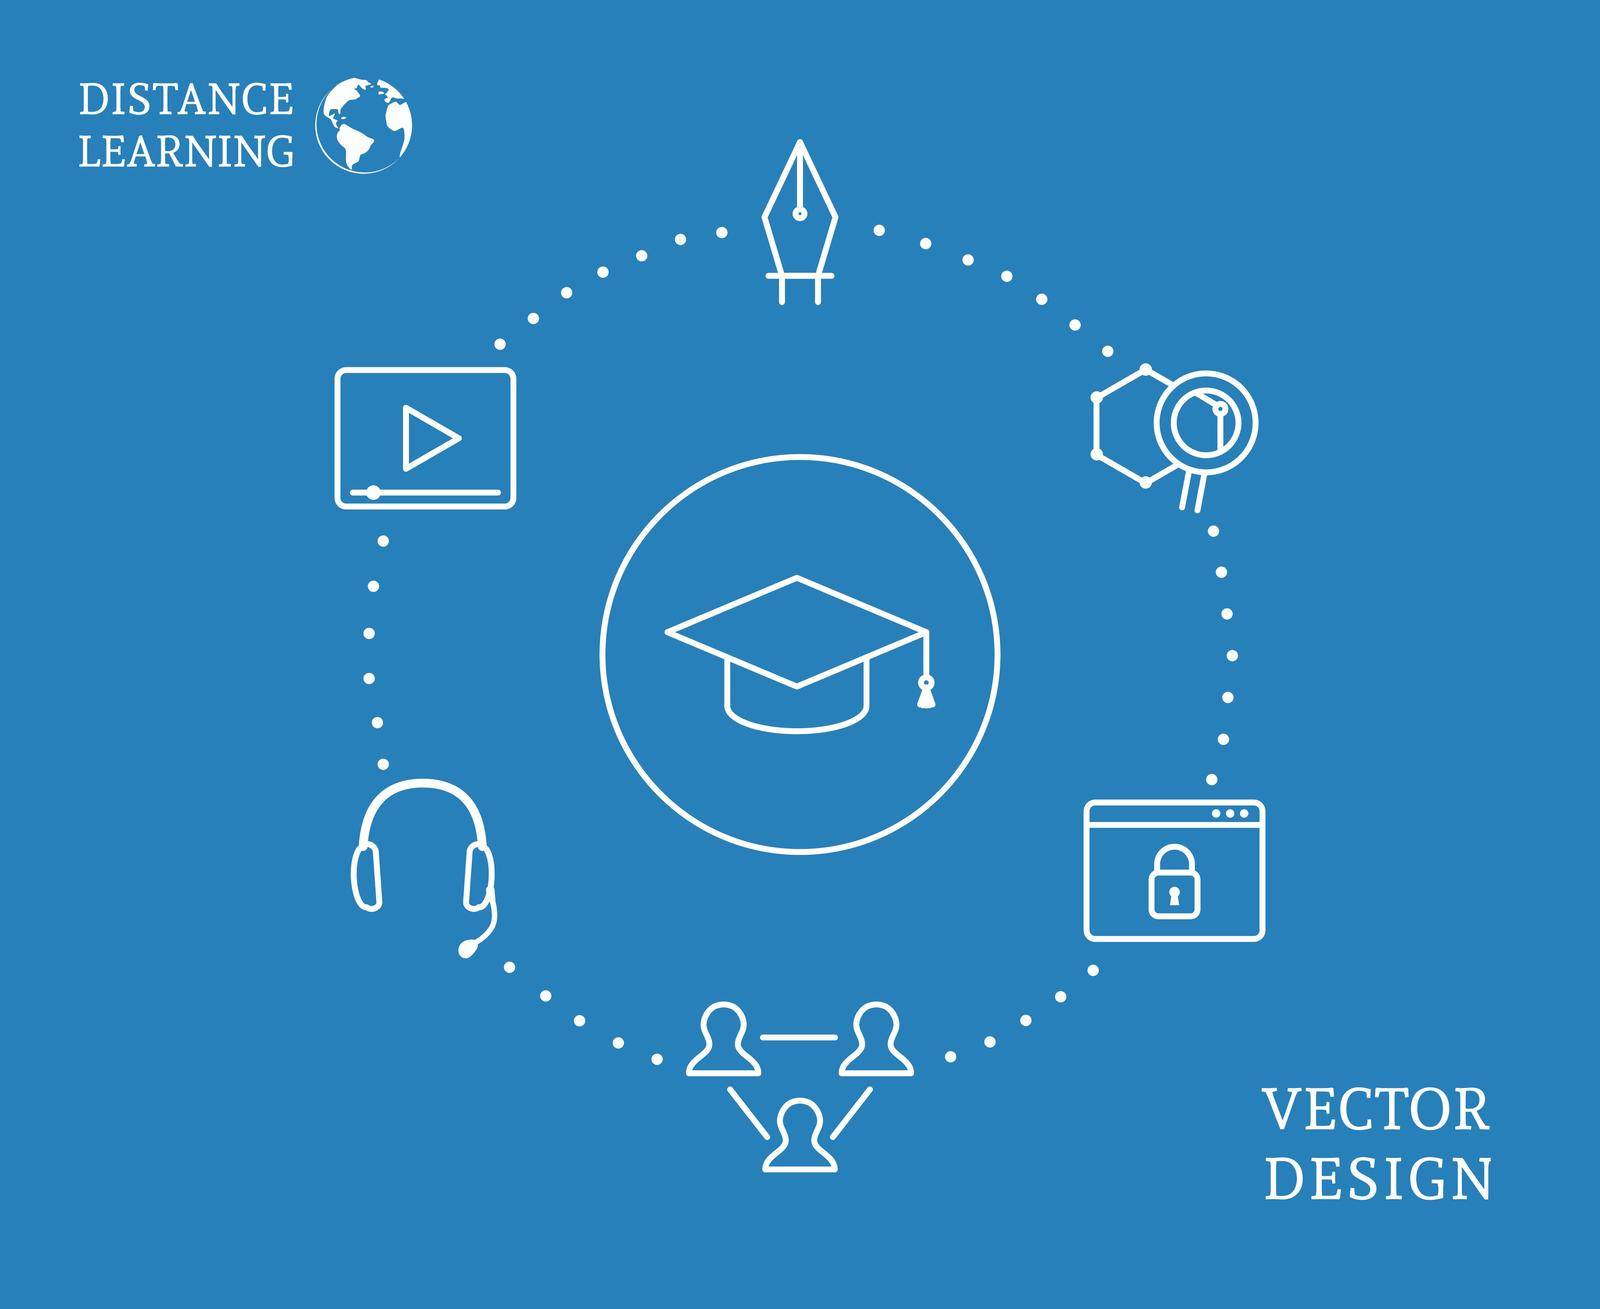 Distance learning concept with lineart icons. Vector flat education infographic